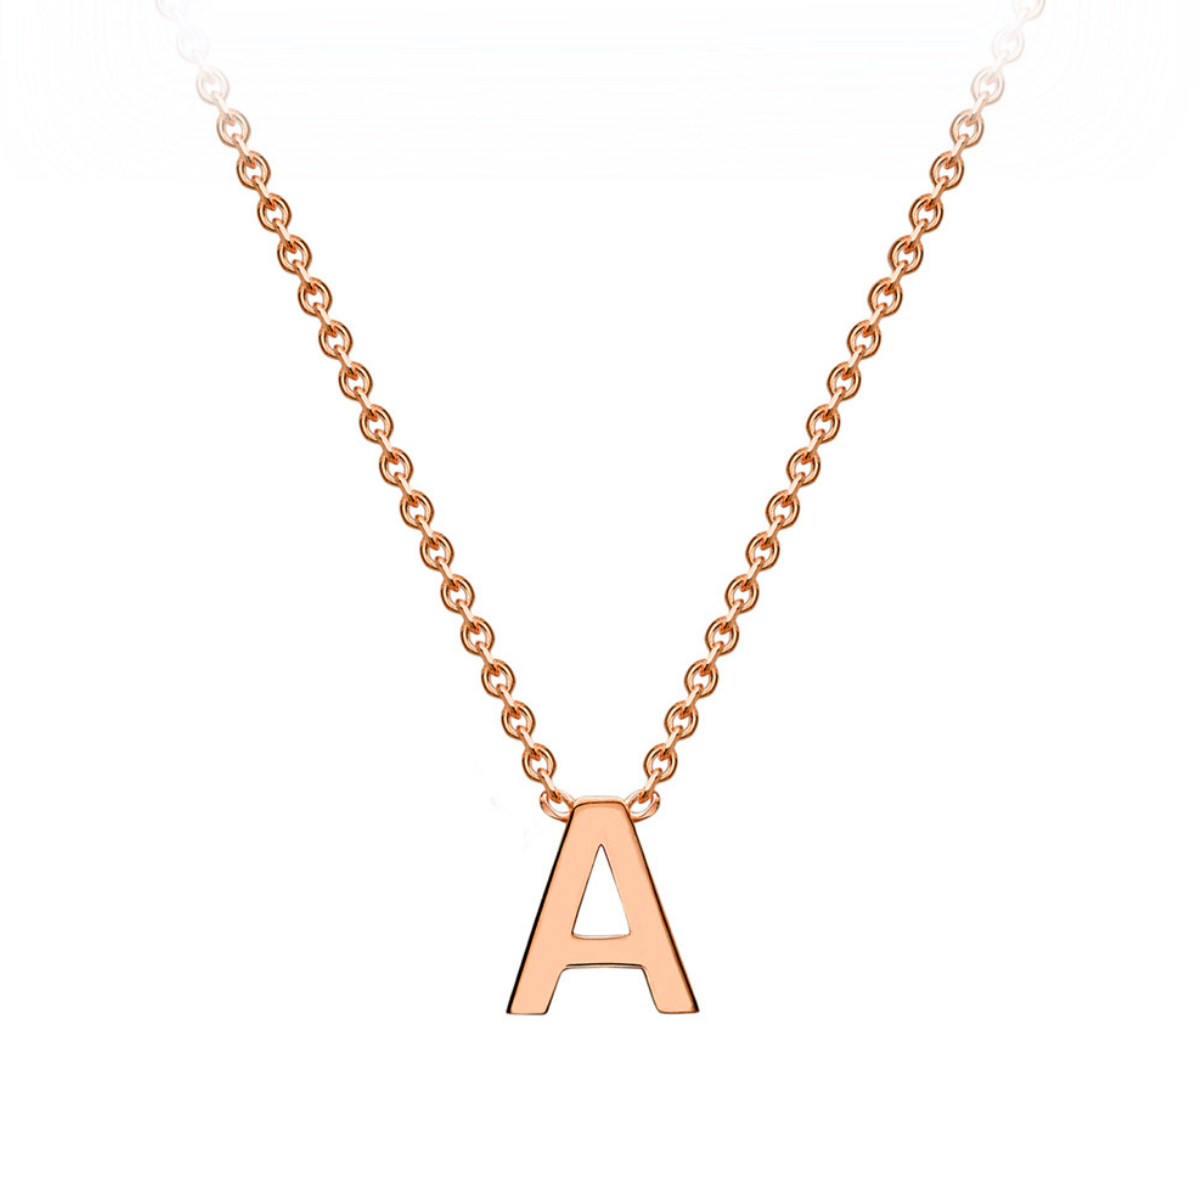 PETITE 'A' INITIAL NECKLACE | 9K SOLID ROSE GOLD